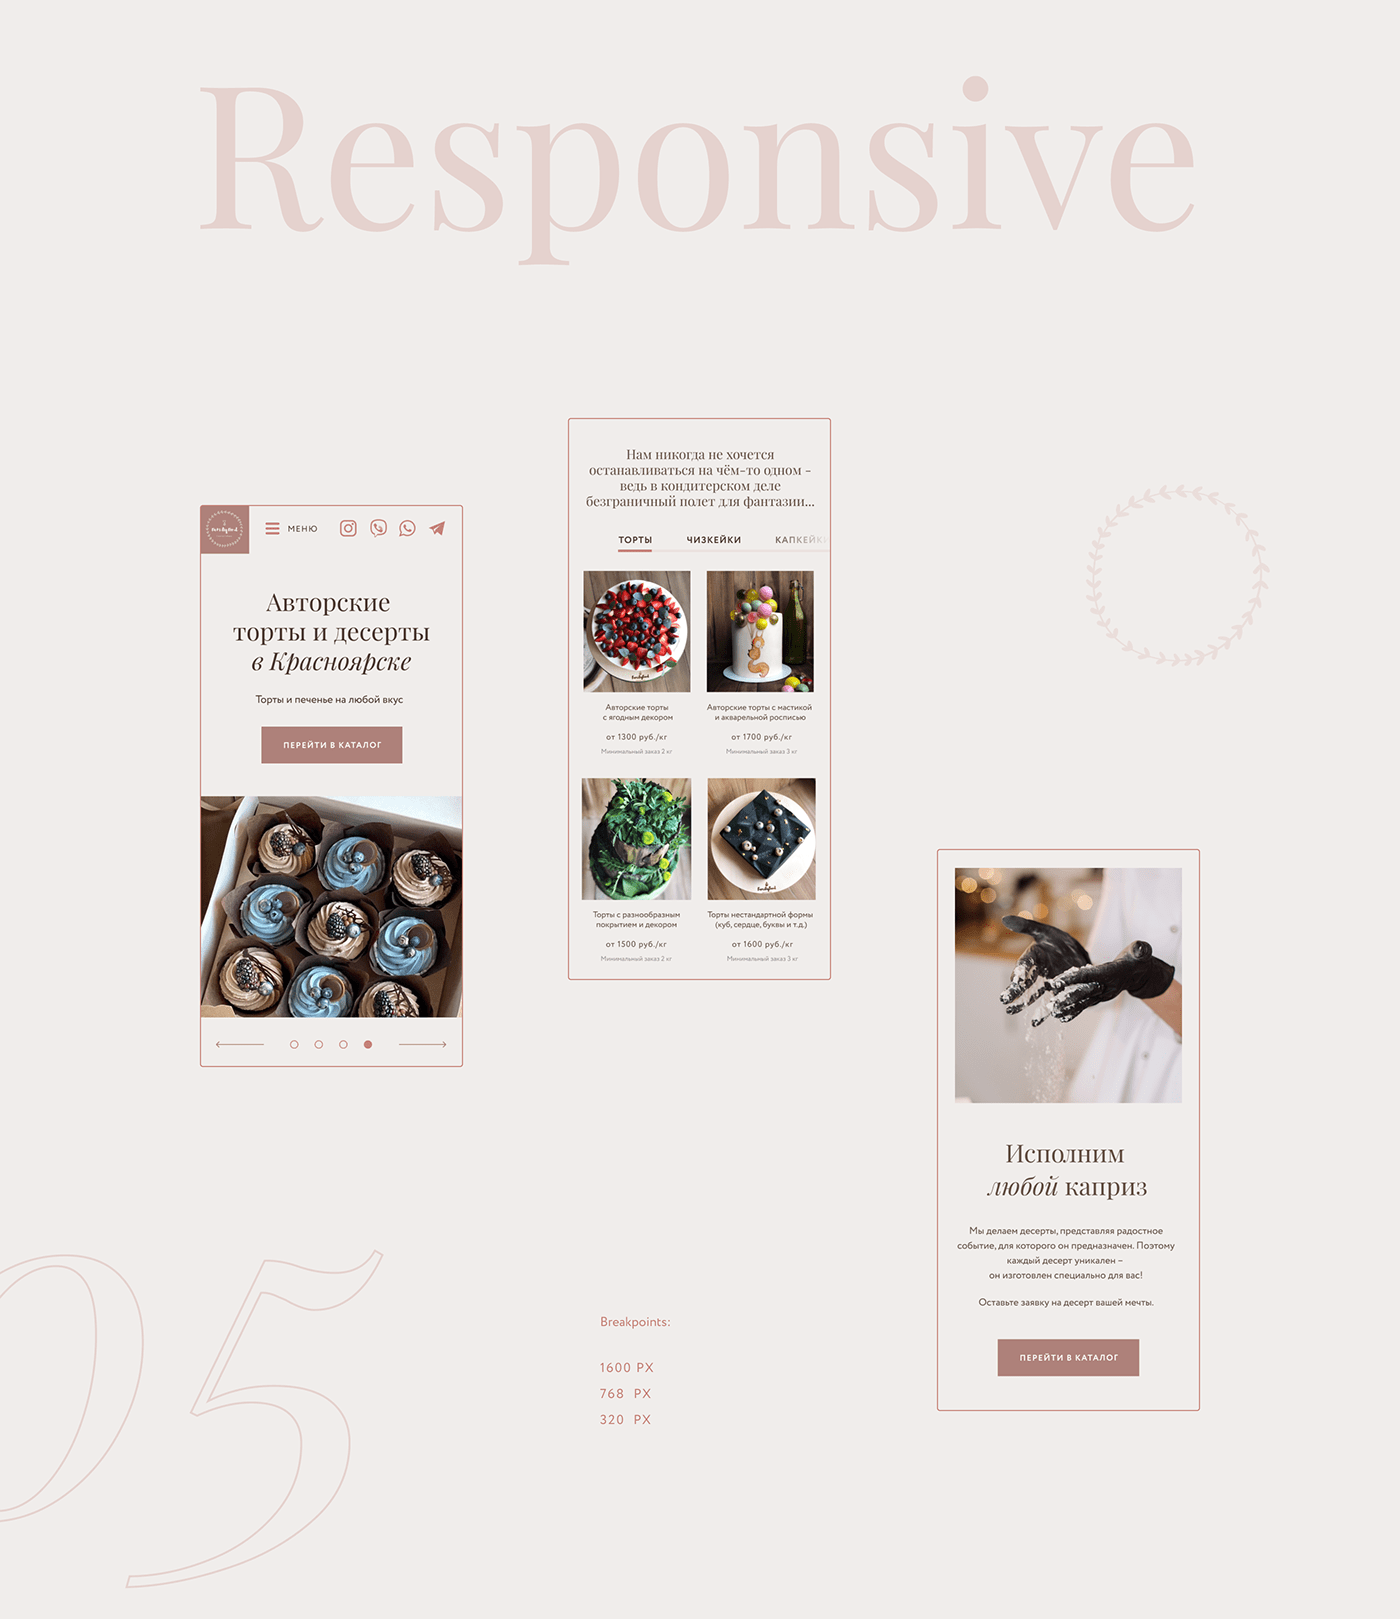 cakes clean Confectionery cookies cupcake dessert Food  Gingerbread landing page minimal